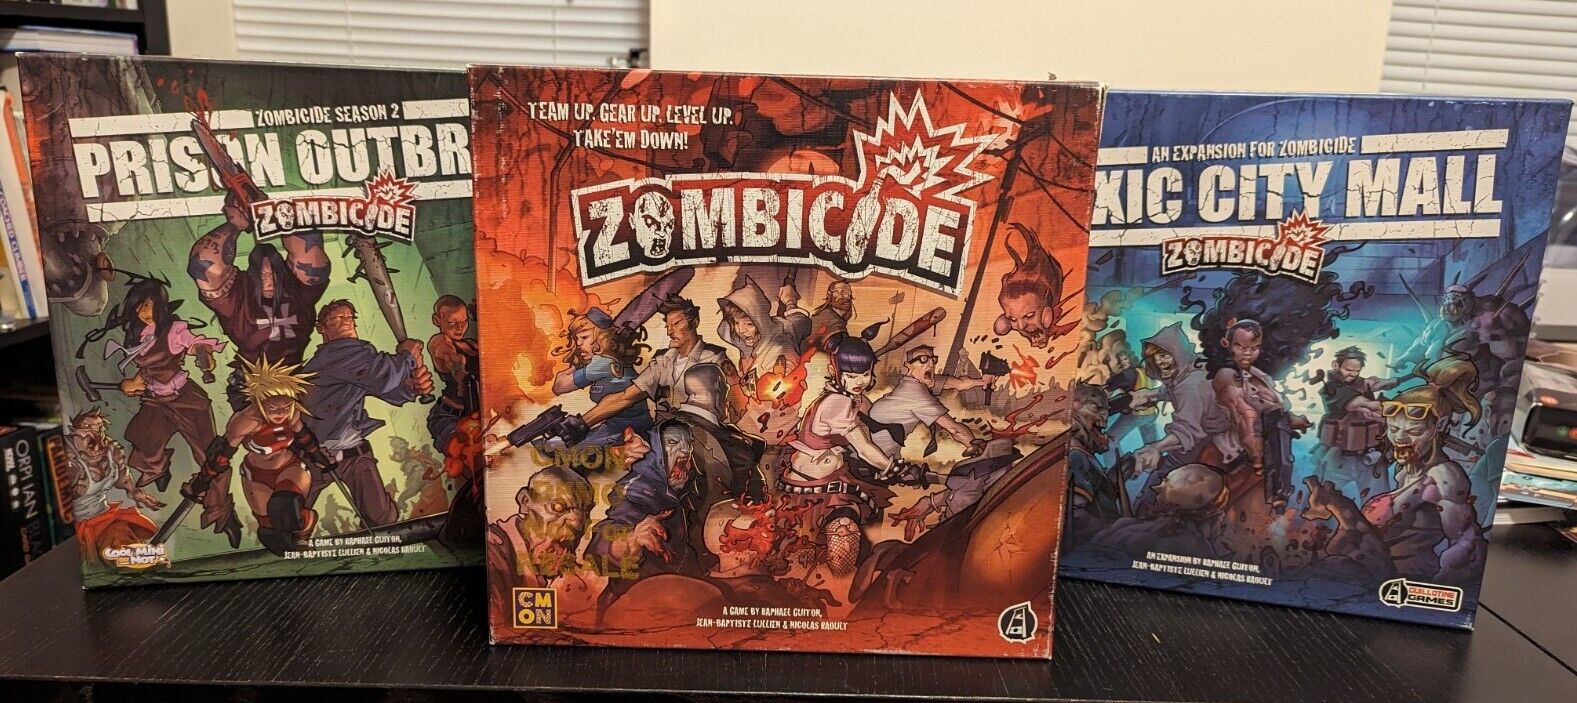 Zombicide Lot of 3: Original, Prison Outbreak, and Toxic City Mall + Extras